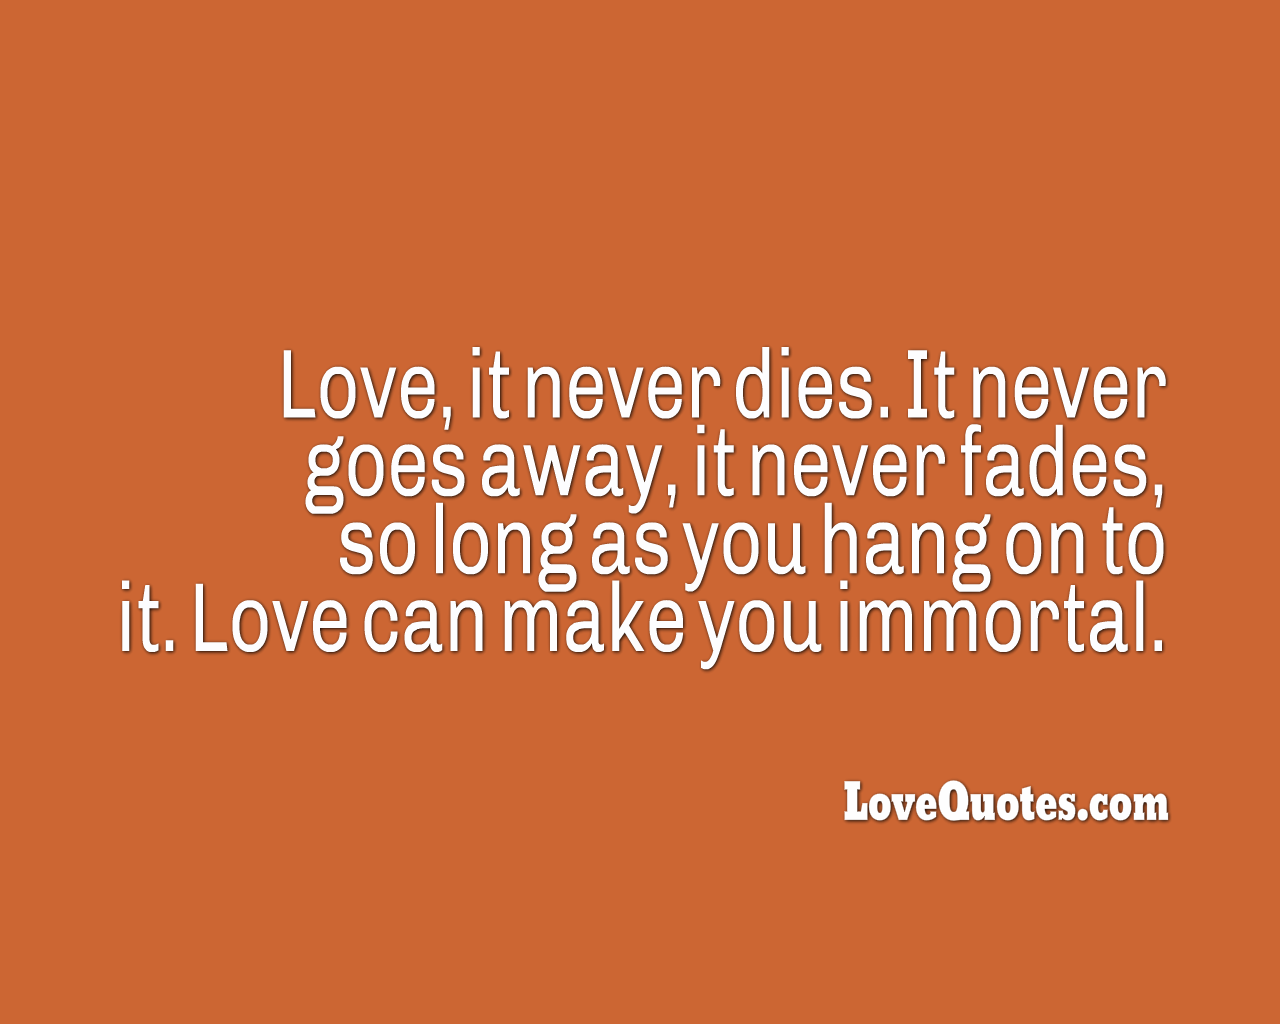 Love Can Make You Immortal